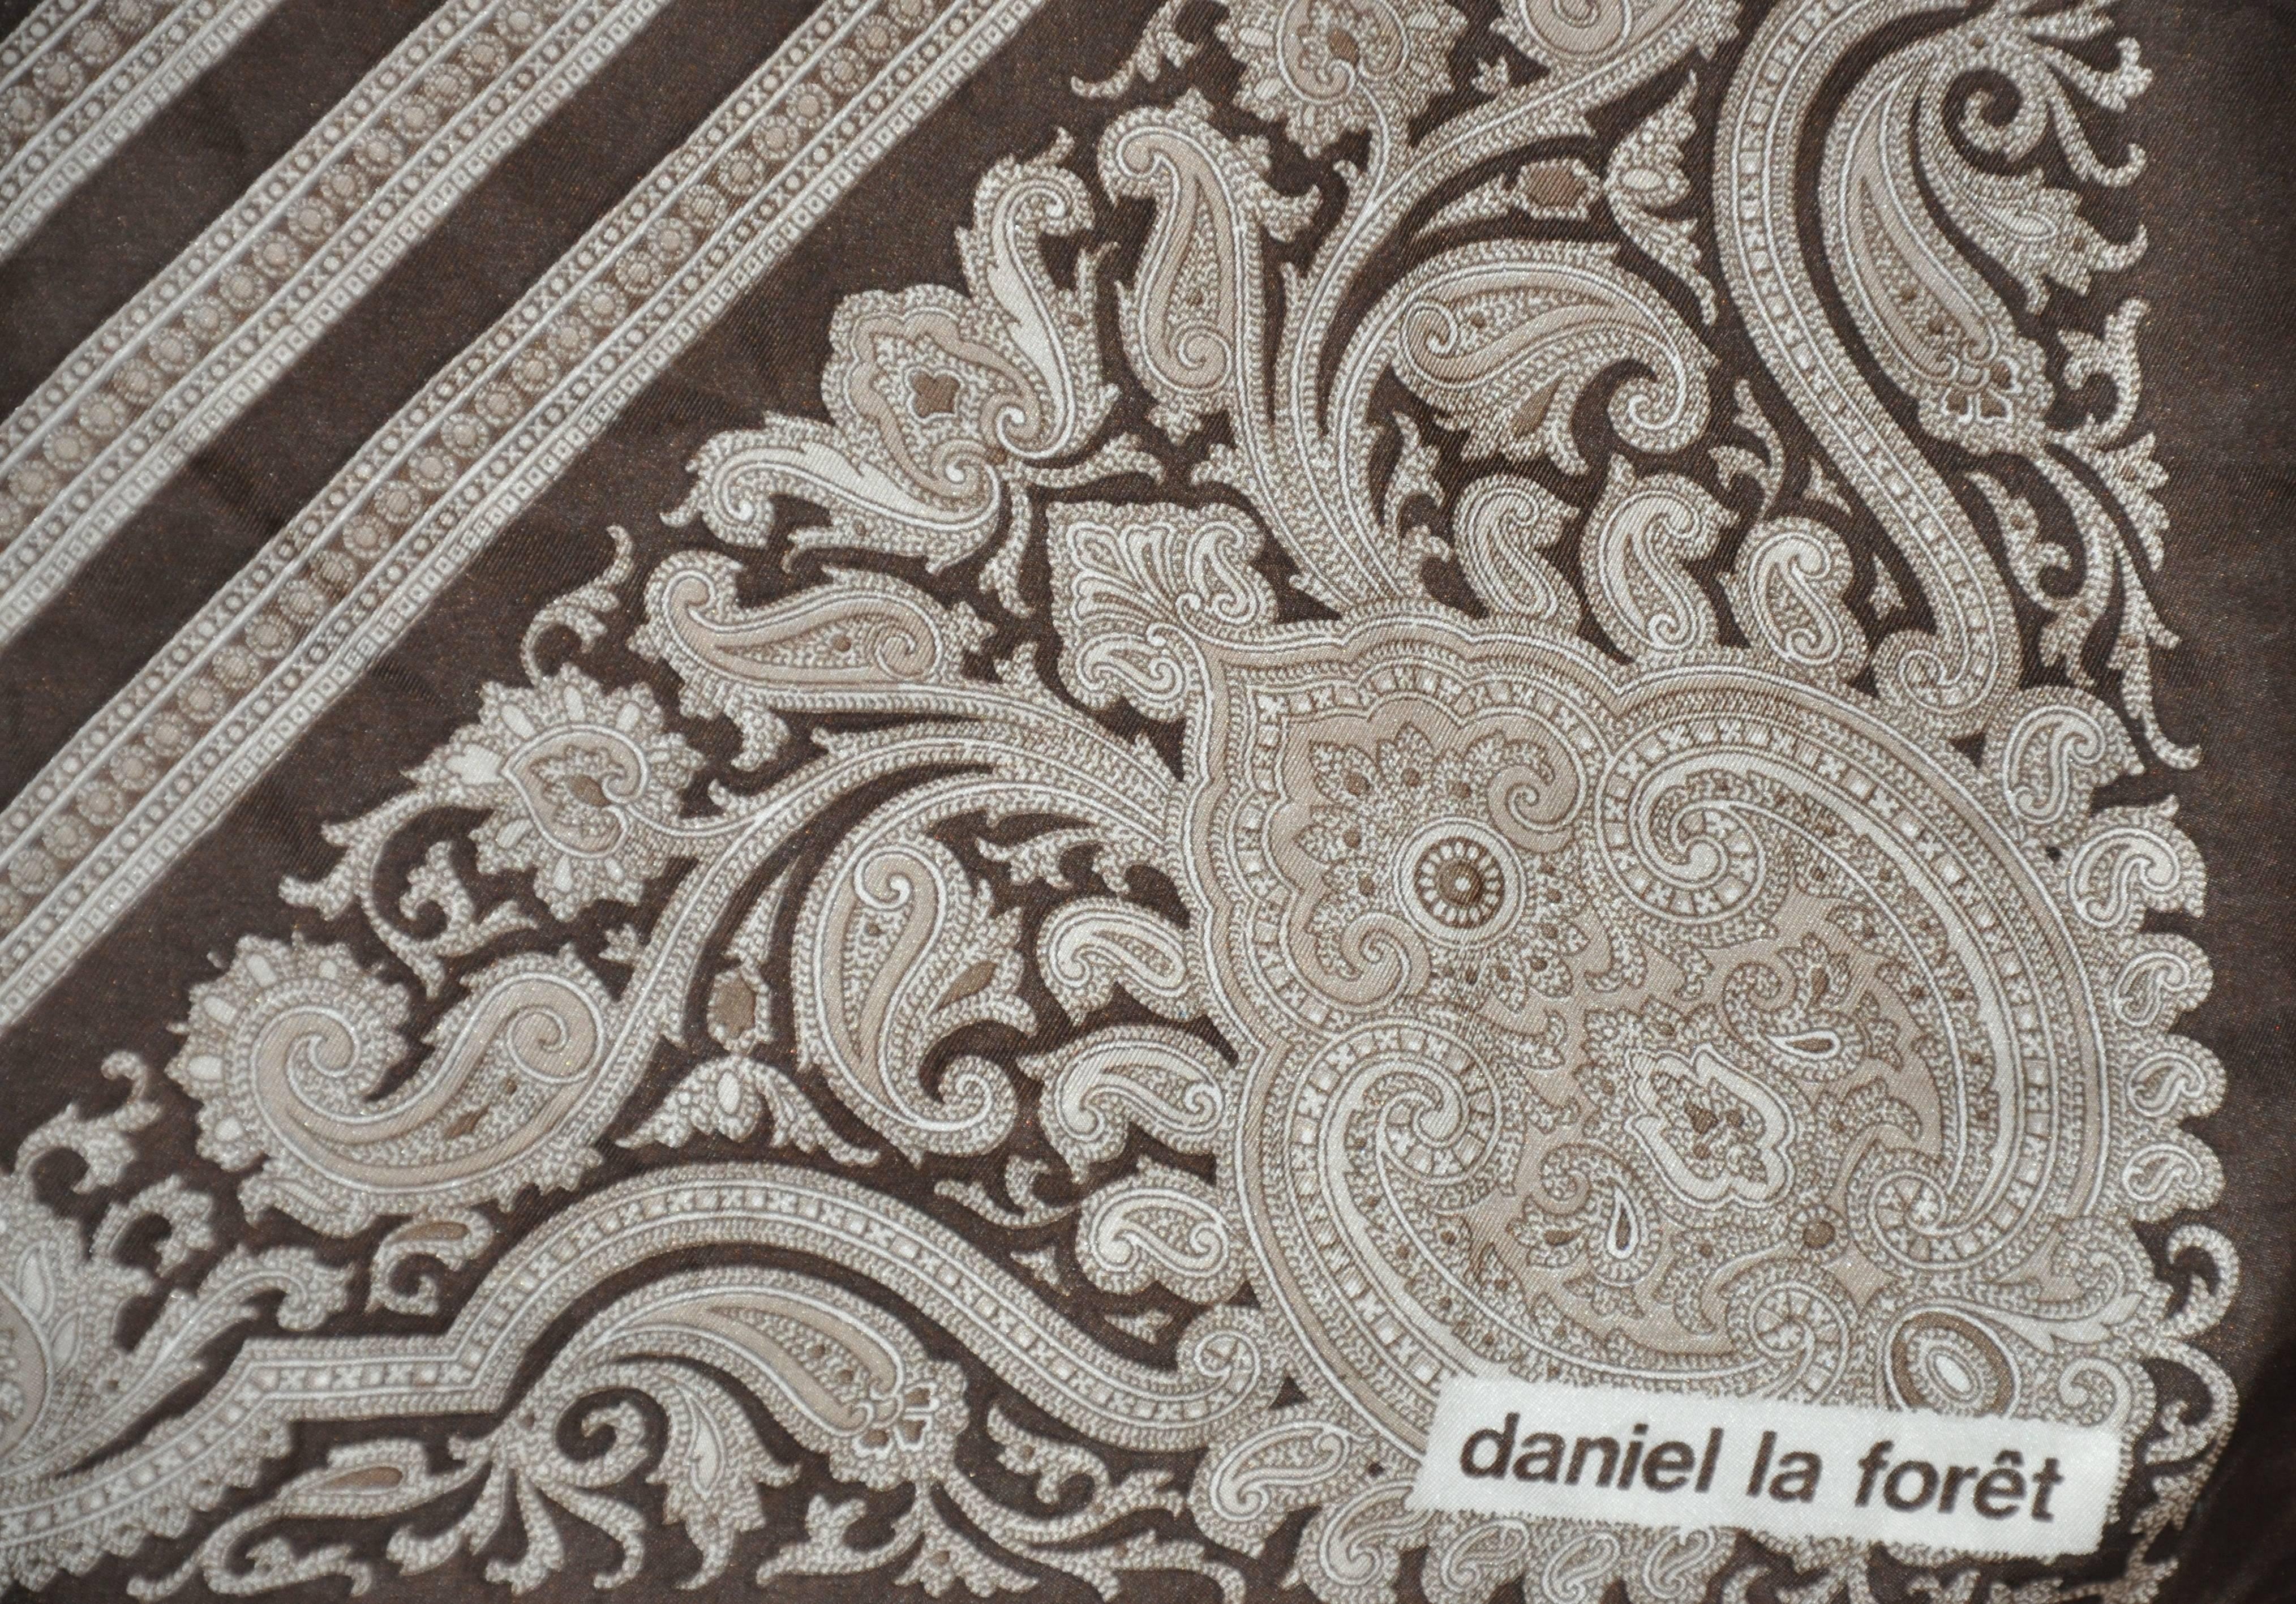        Daniel La Foret wonderfully detailed coco-brown & ivory palsey silk handkerchief accented with hand-rolled edges, measures 18 1/2 inches by 18 1/2 inches. Made in Italy.